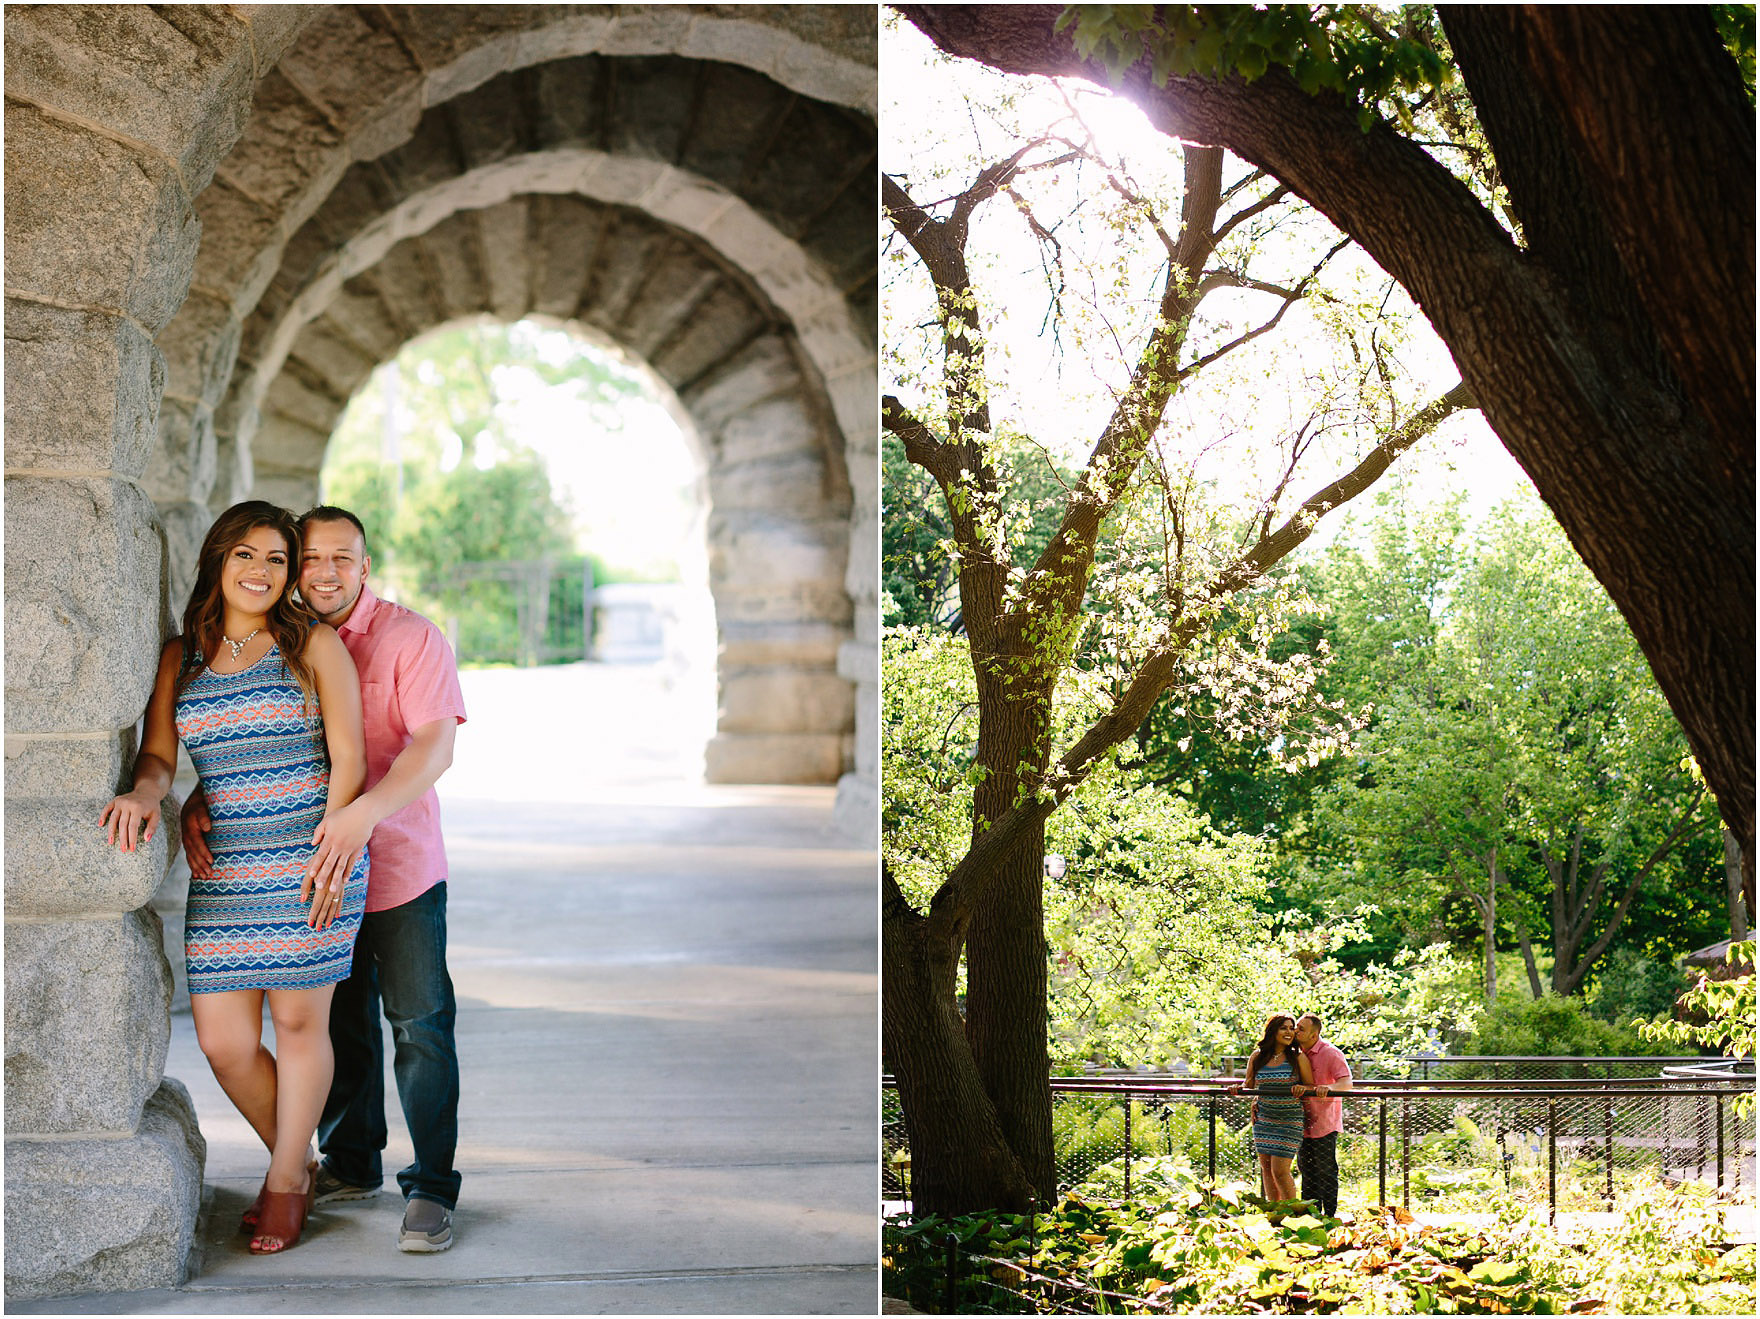 LincolnParkZooEngagementPhotosLincolnParkEngagementPhotosHoneycombEngagementChicagoEngagementPhotographer__0015